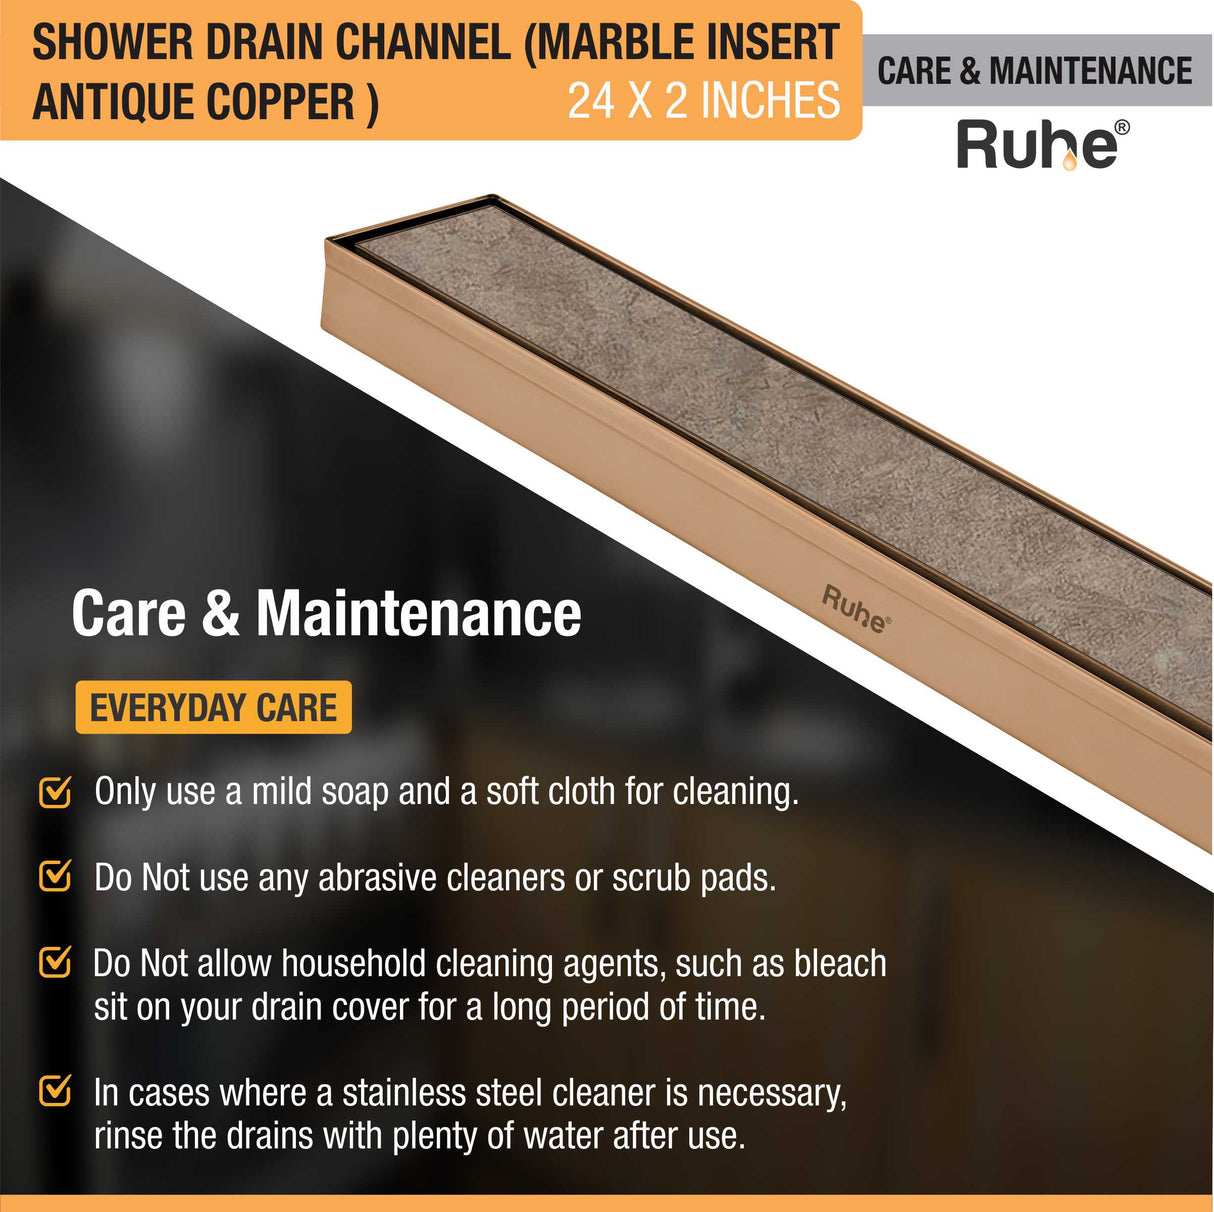 Marble Insert Shower Drain Channel (24 x 2 Inches) ANTIQUE COPPER care and maintenance